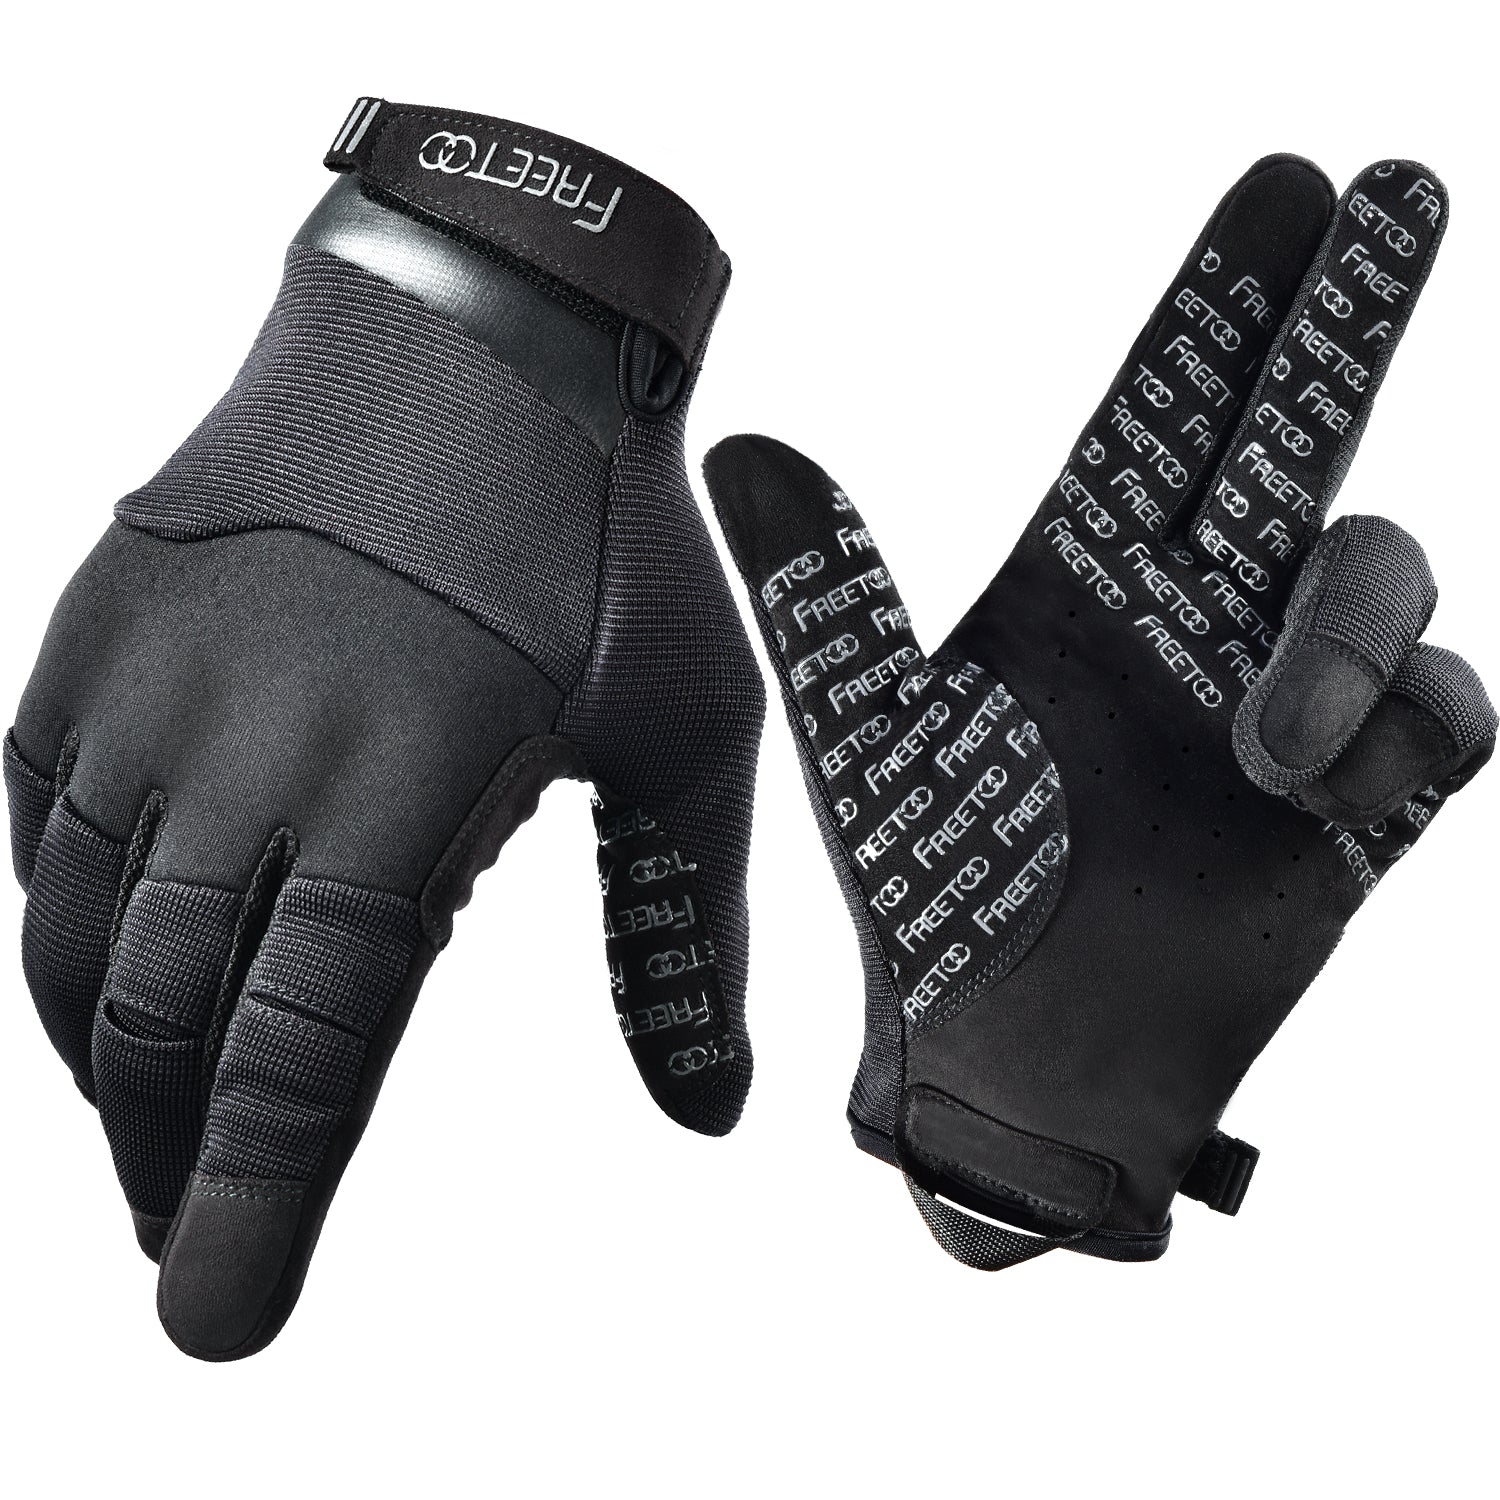 FREETOO® Touch Screen Tactical Shooting Gloves for Men